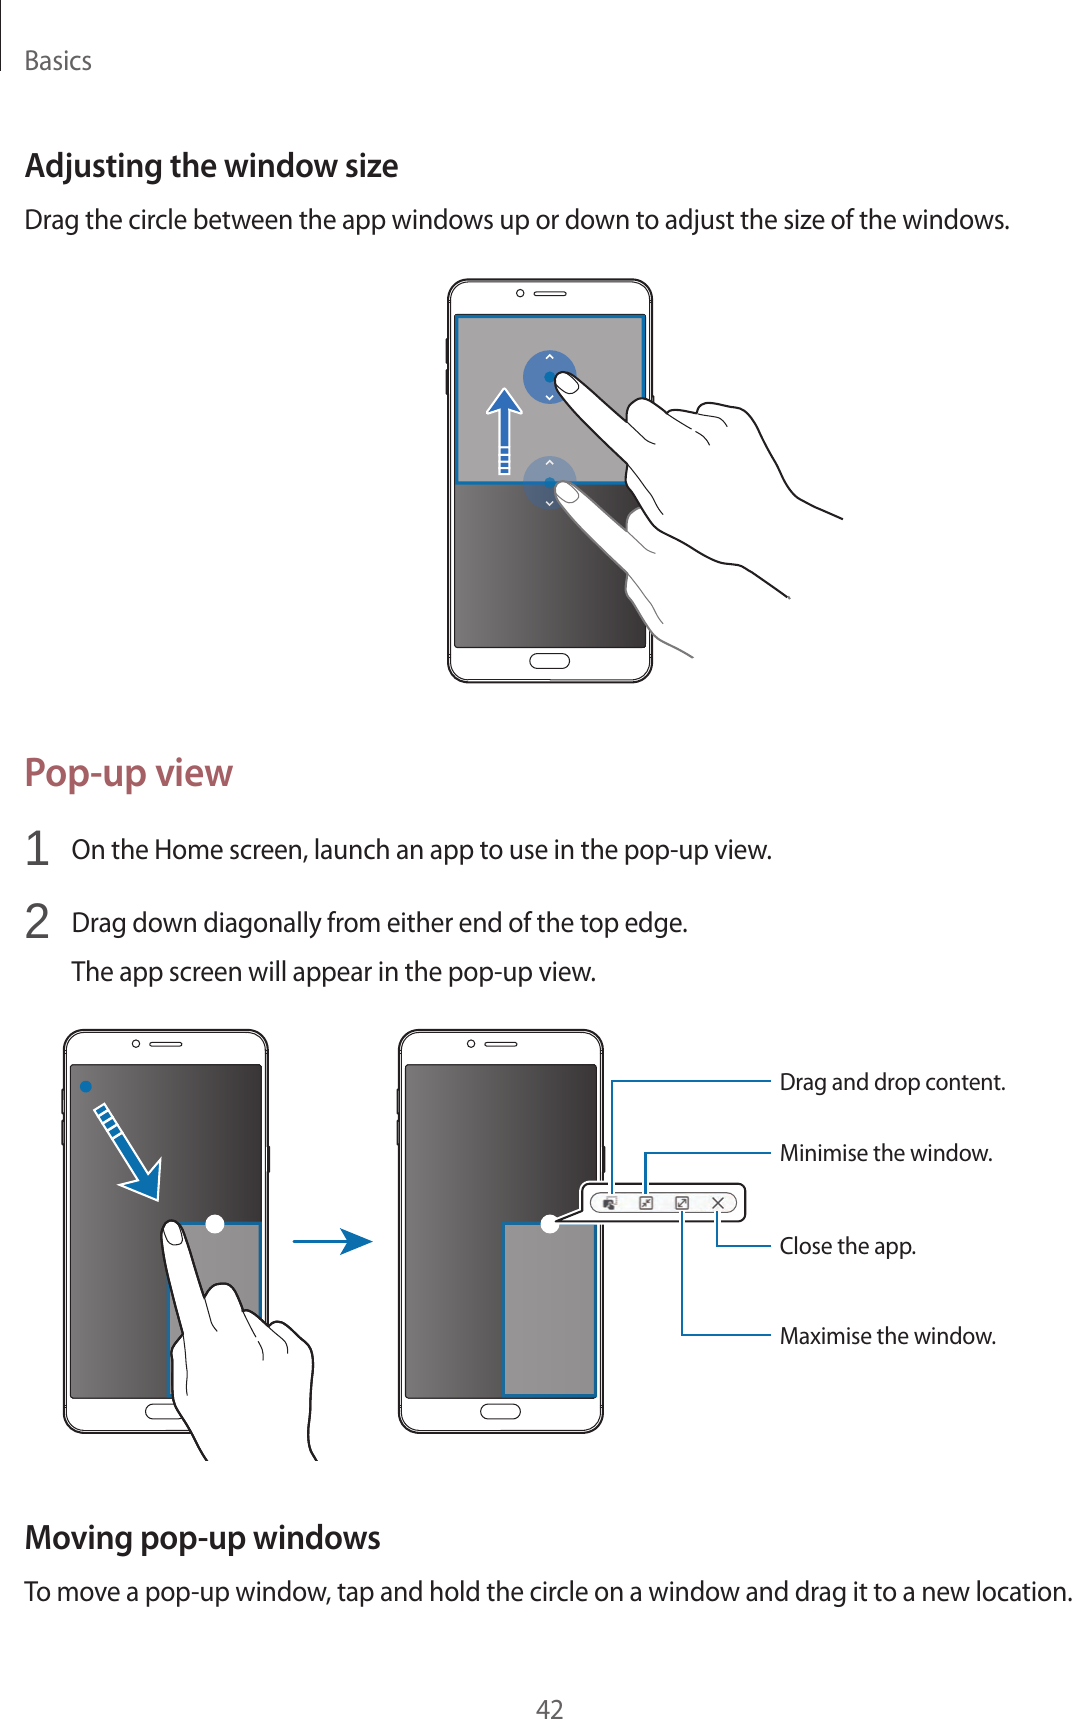 Basics42Adjusting the window sizeDrag the circle between the app windows up or down to adjust the size of the windows.Pop-up view1  On the Home screen, launch an app to use in the pop-up view.2  Drag down diagonally from either end of the top edge.The app screen will appear in the pop-up view.Minimise the window.Close the app.Maximise the window.Drag and drop content.Moving pop-up windowsTo move a pop-up window, tap and hold the circle on a window and drag it to a new location.